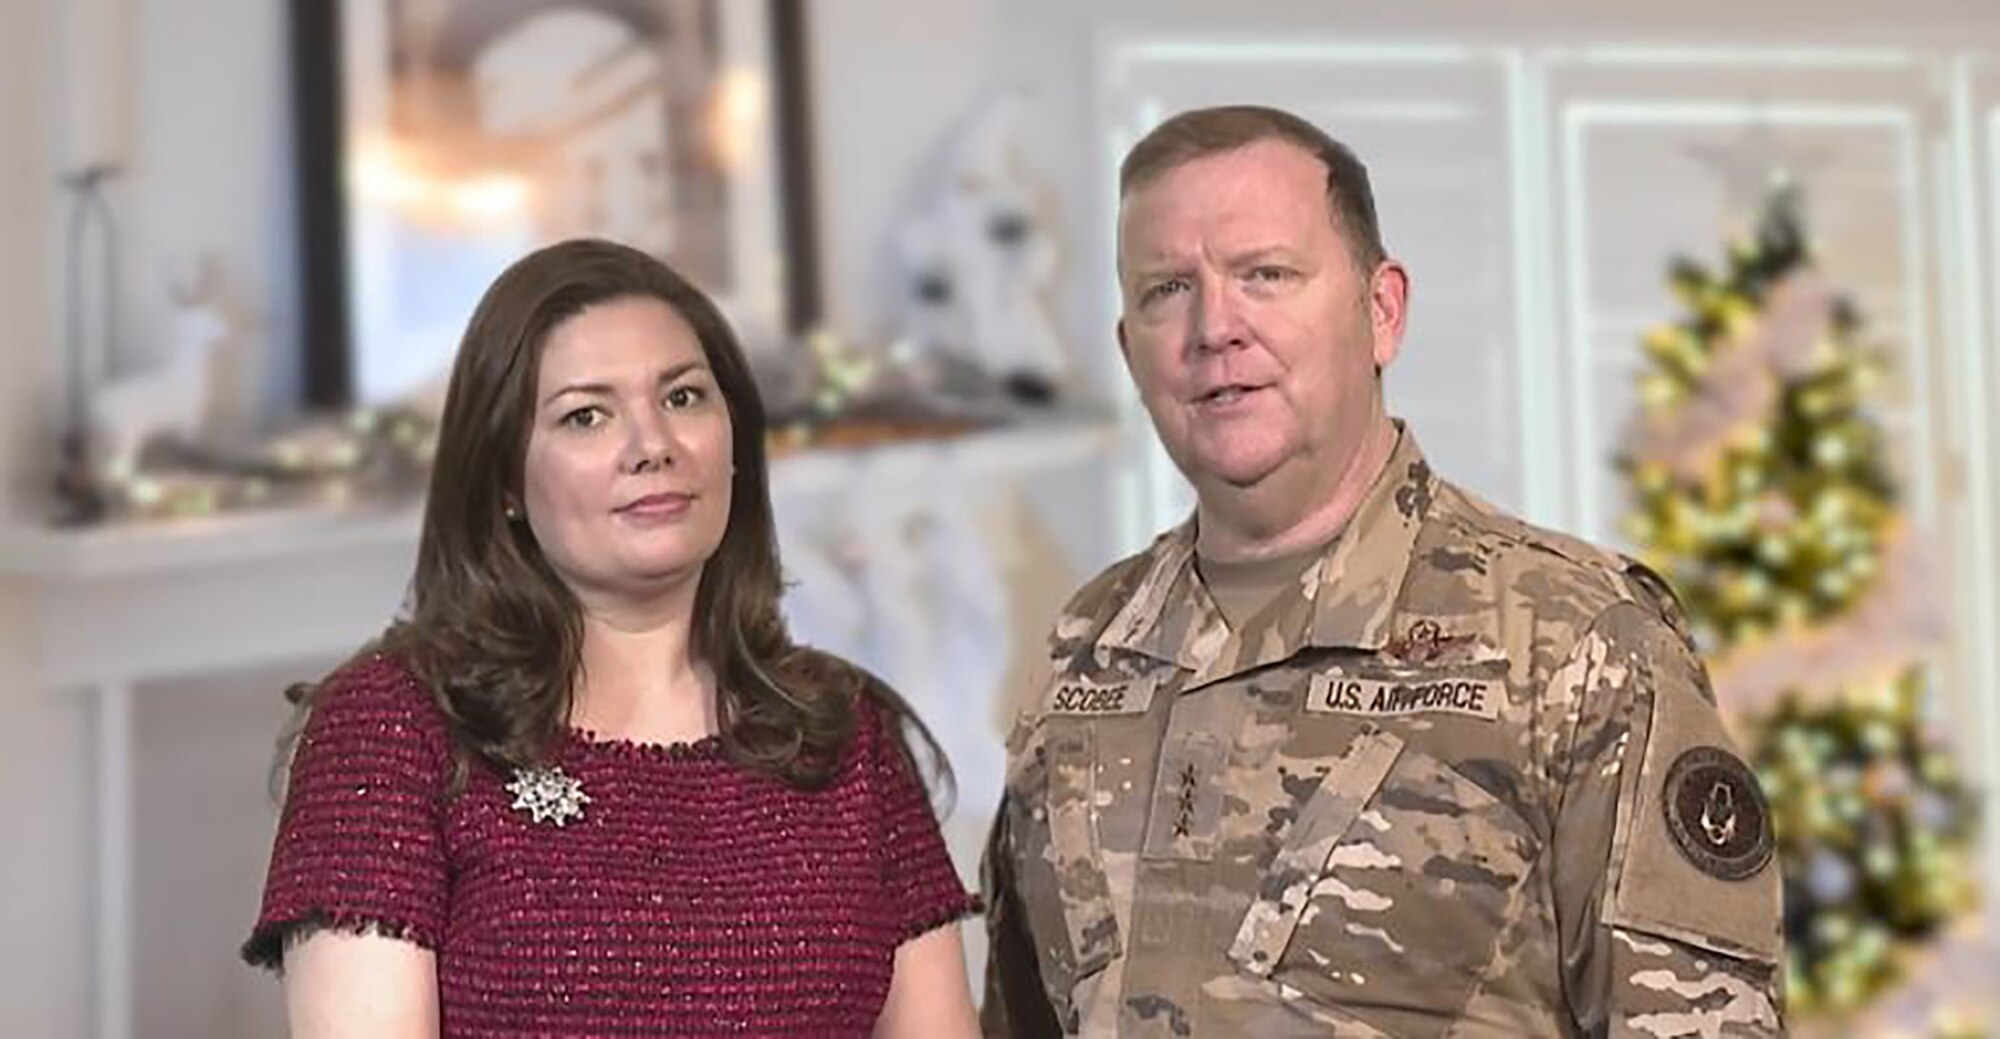 Lt. Gen. Rich Scobee and his wife Janis send their warmest holiday greetings from their family to yours... HAPPY HOLIDAYS!